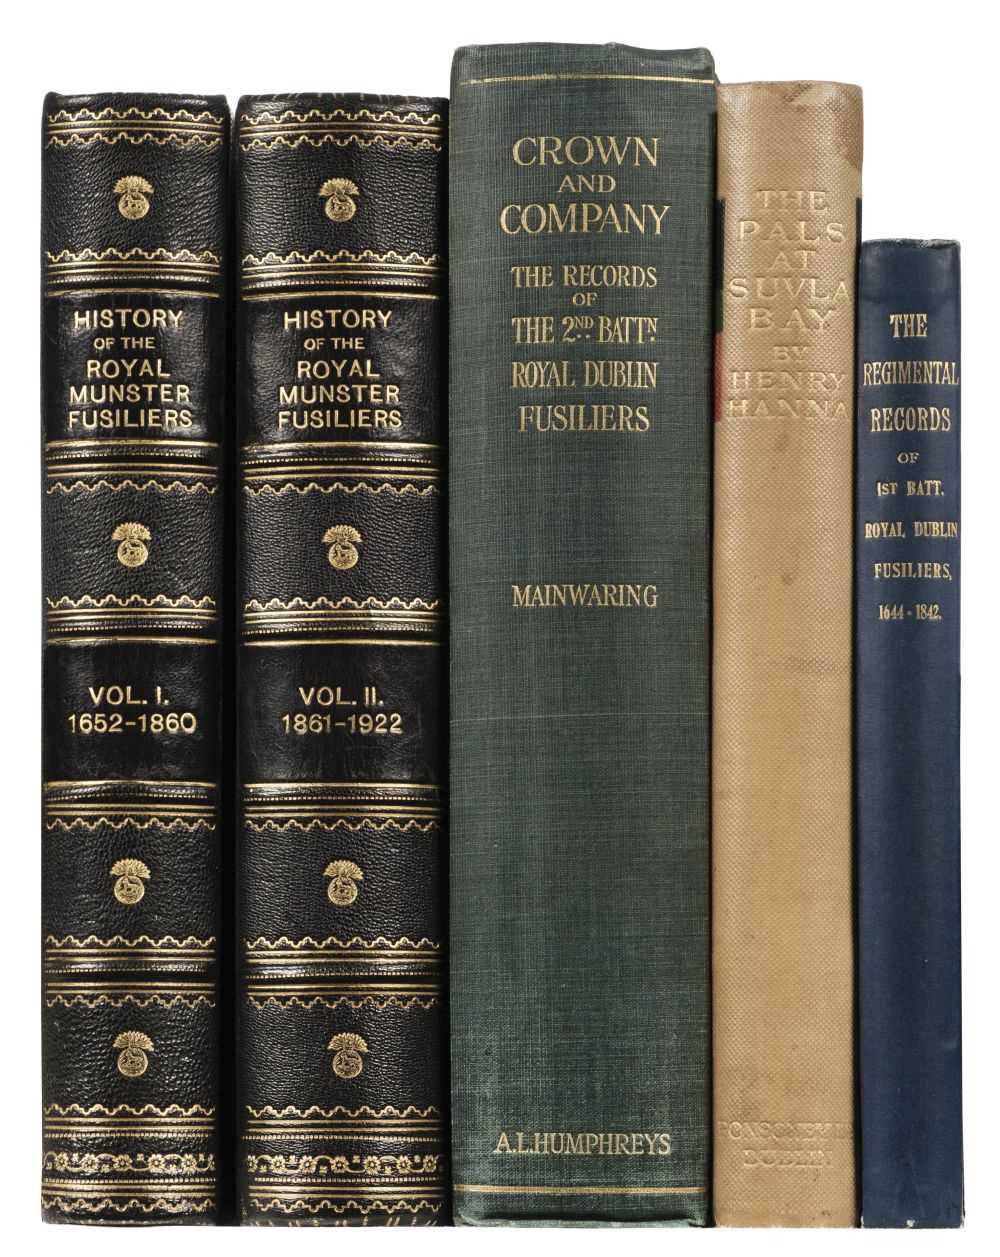 Lot 15 - McCance (Captain S.) History of the Royal Munster Fusiliers, 2 volumes, 1927